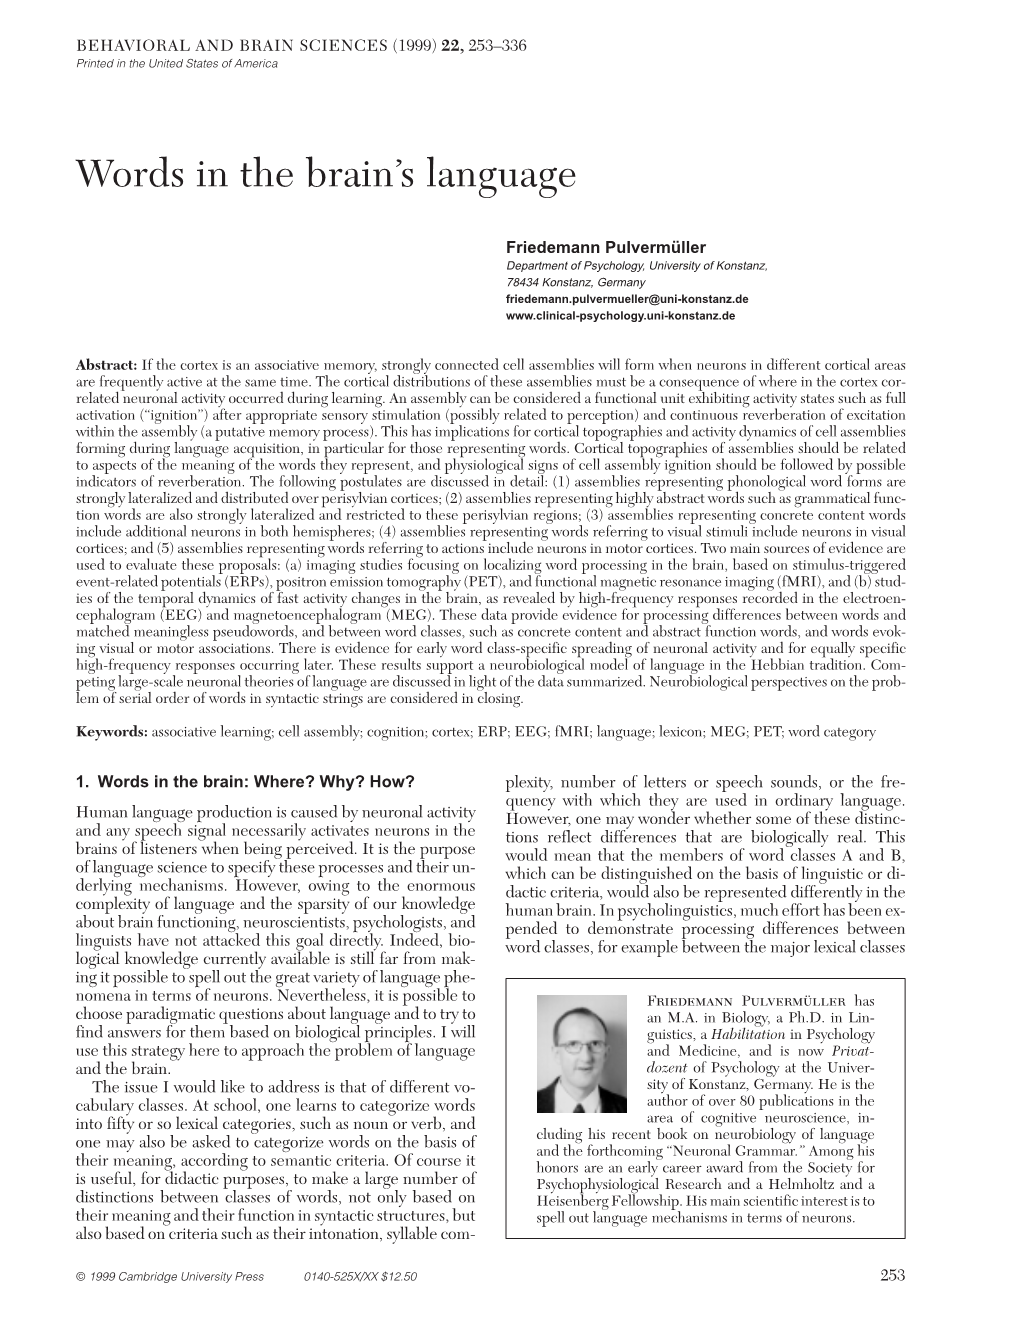 Words in the Brain's Language